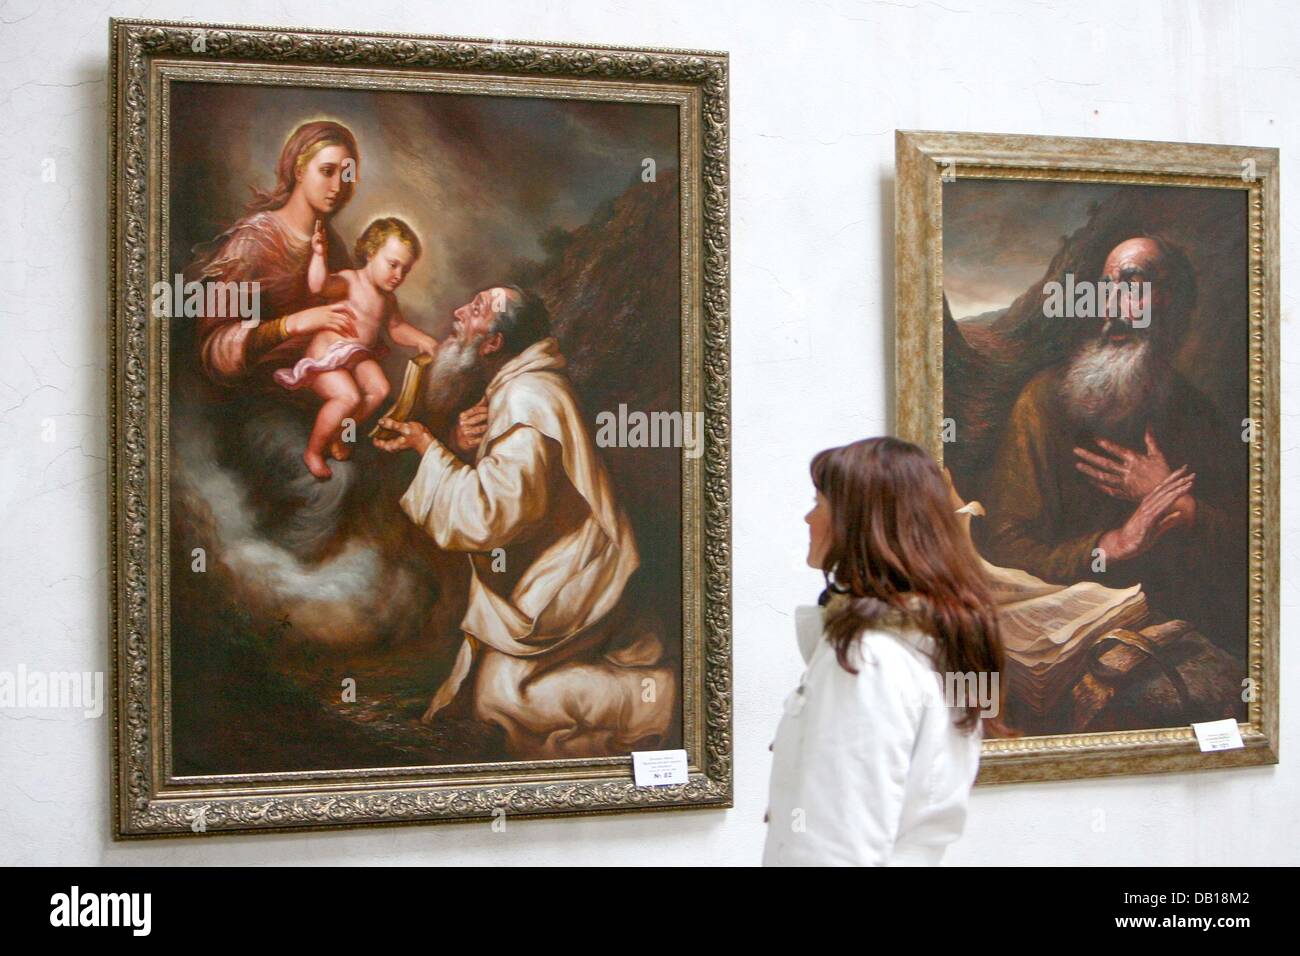 A young woman looks at the painting 'Madonna mit dem segnenden Kleinkind' ('Madonna with the Blessing Child') by Valeriy Shvetsov on display at the Ukrainian Culture Centre ('Kulturzentrum der Ukraine') in Magdeburg, Germany, 15 November 2007. The artwork belongs to the alltogether 400 paintings exhibited by 65 Ukrainian artists in the scope of the 6th Magedeburg Art Festival. This Stock Photo